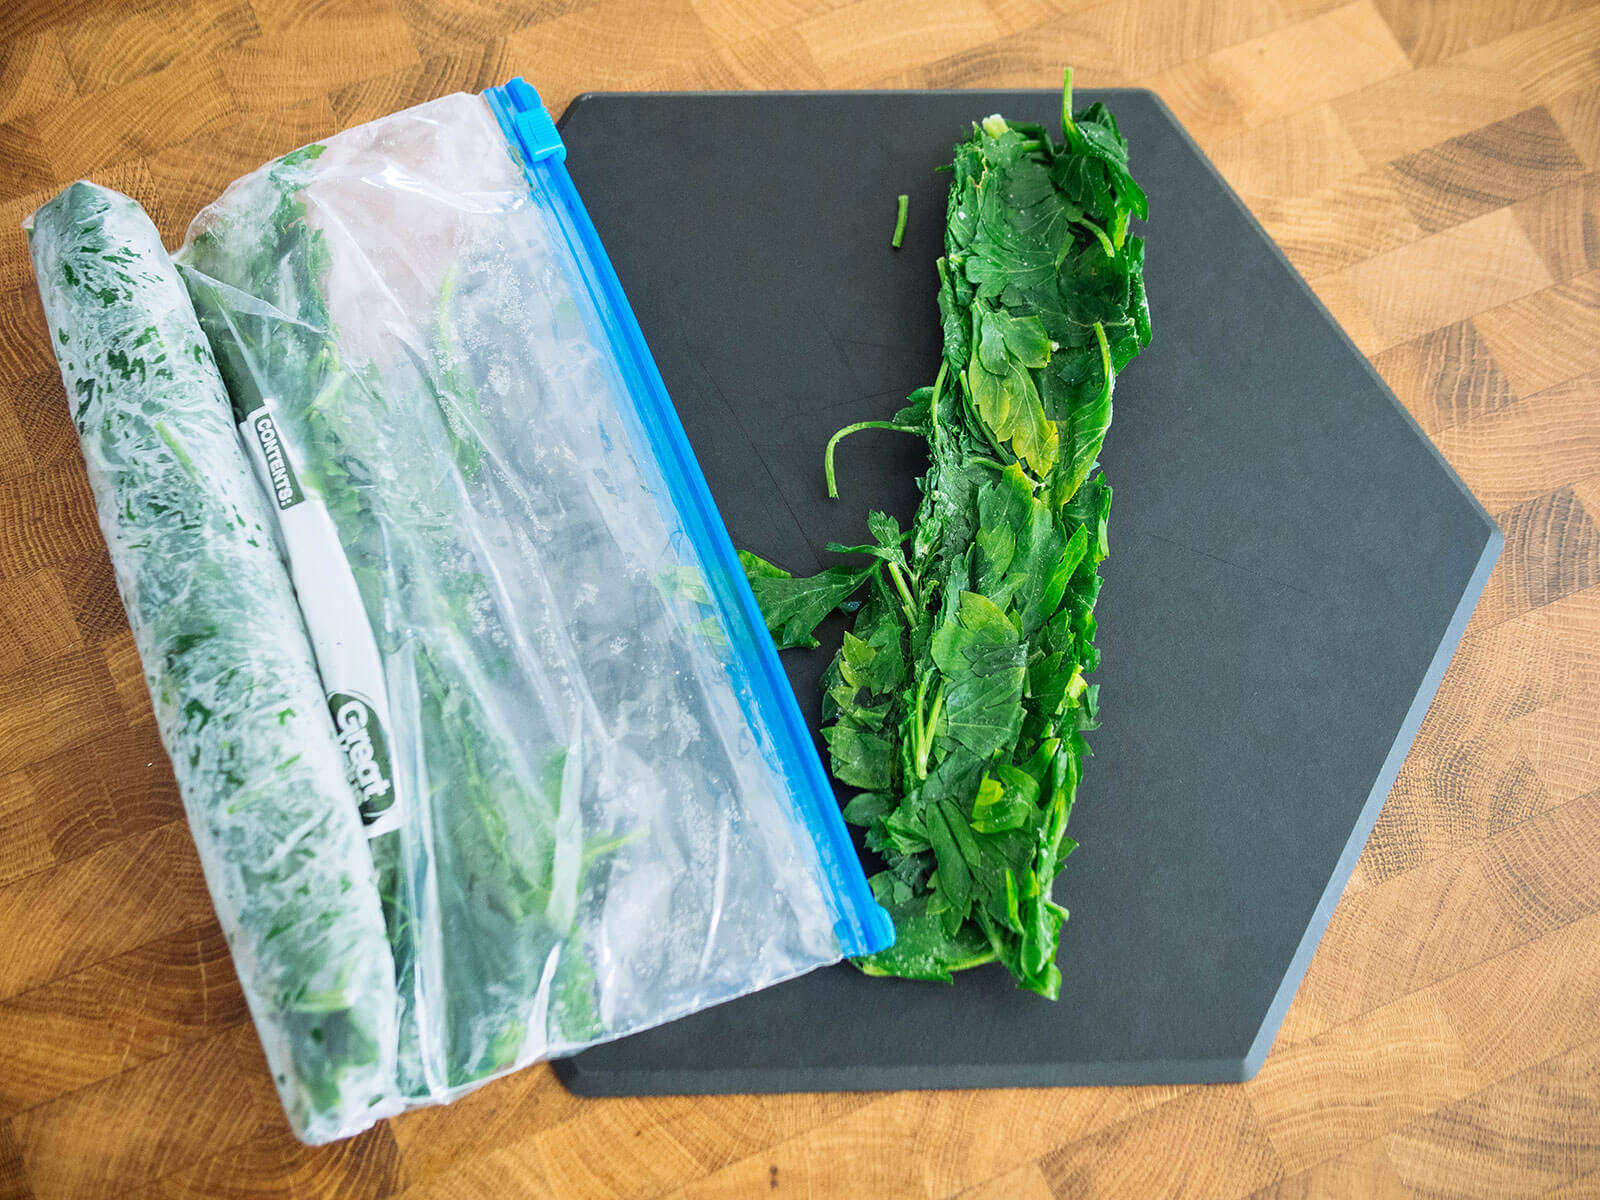 3 best ways to freeze parsley, cilantro, chives, and other herbs